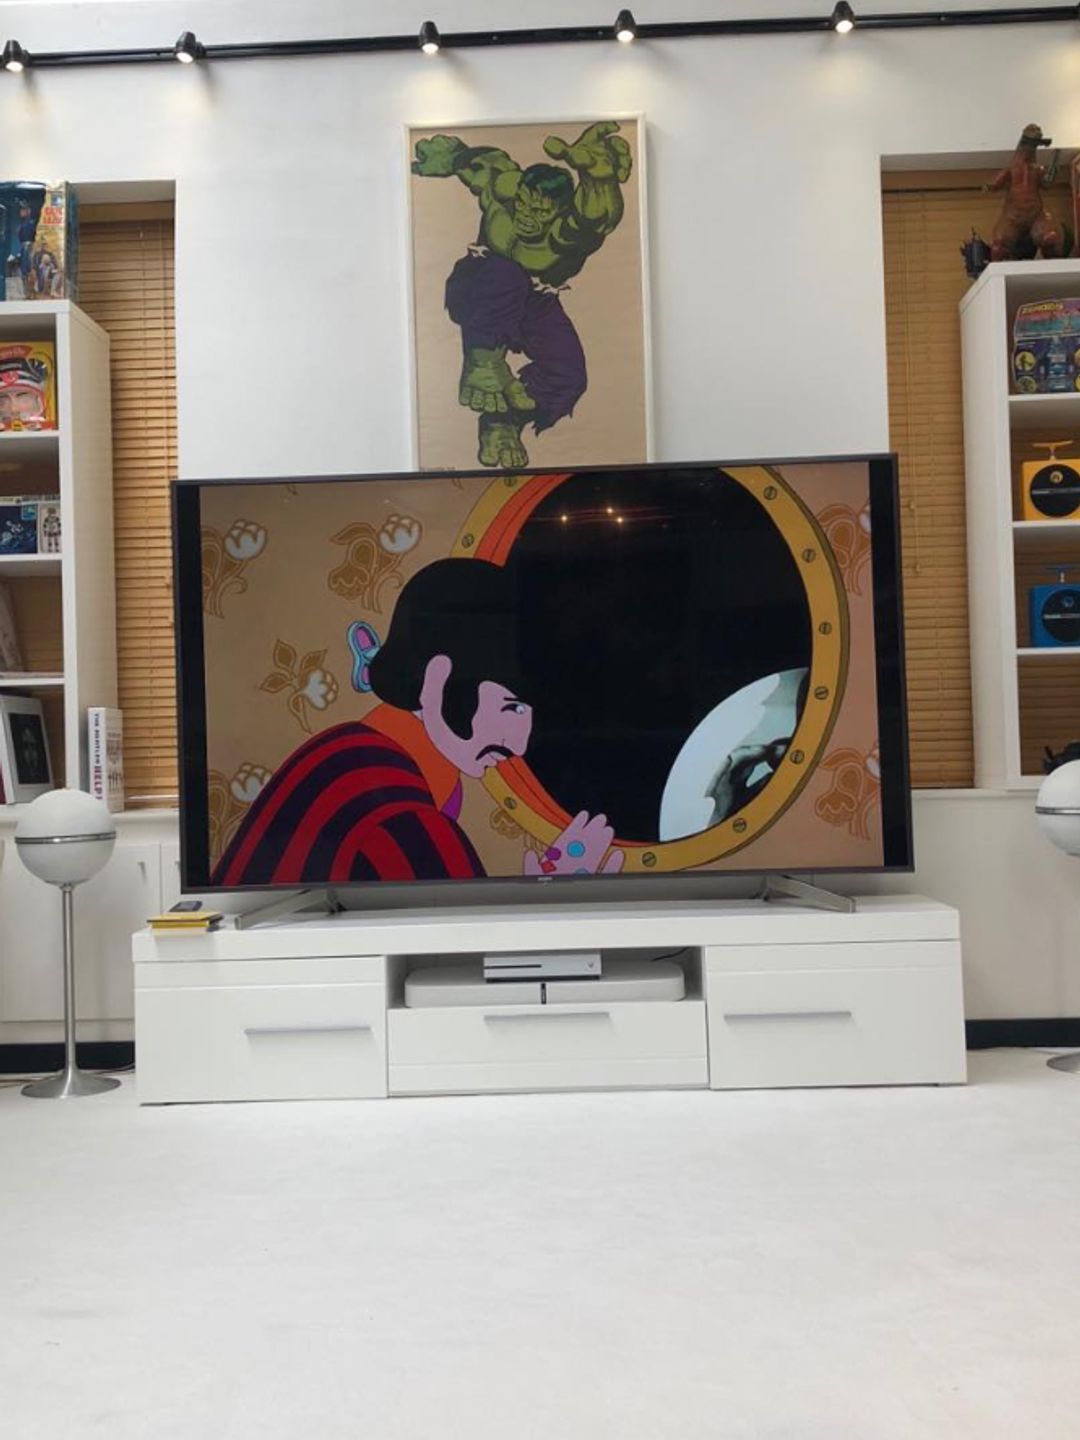 A TV playing Yellow Submarine with as Hulk poster behind it